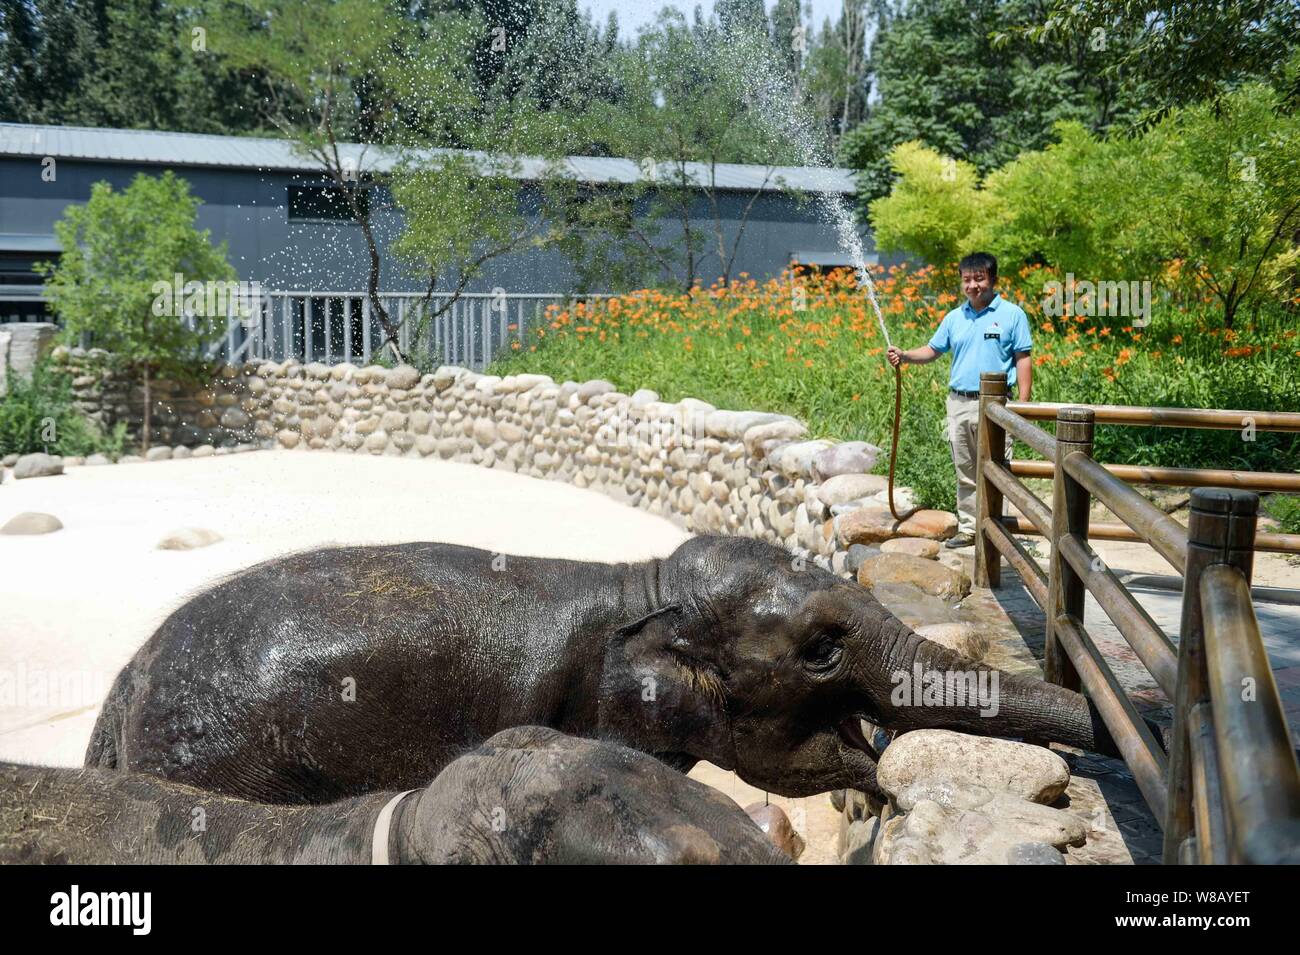 Elephants enjoy water spray to cool off on a scorcher at Beijing Wildlife Park in Beijing, China, 25 June 2016. Stock Photo